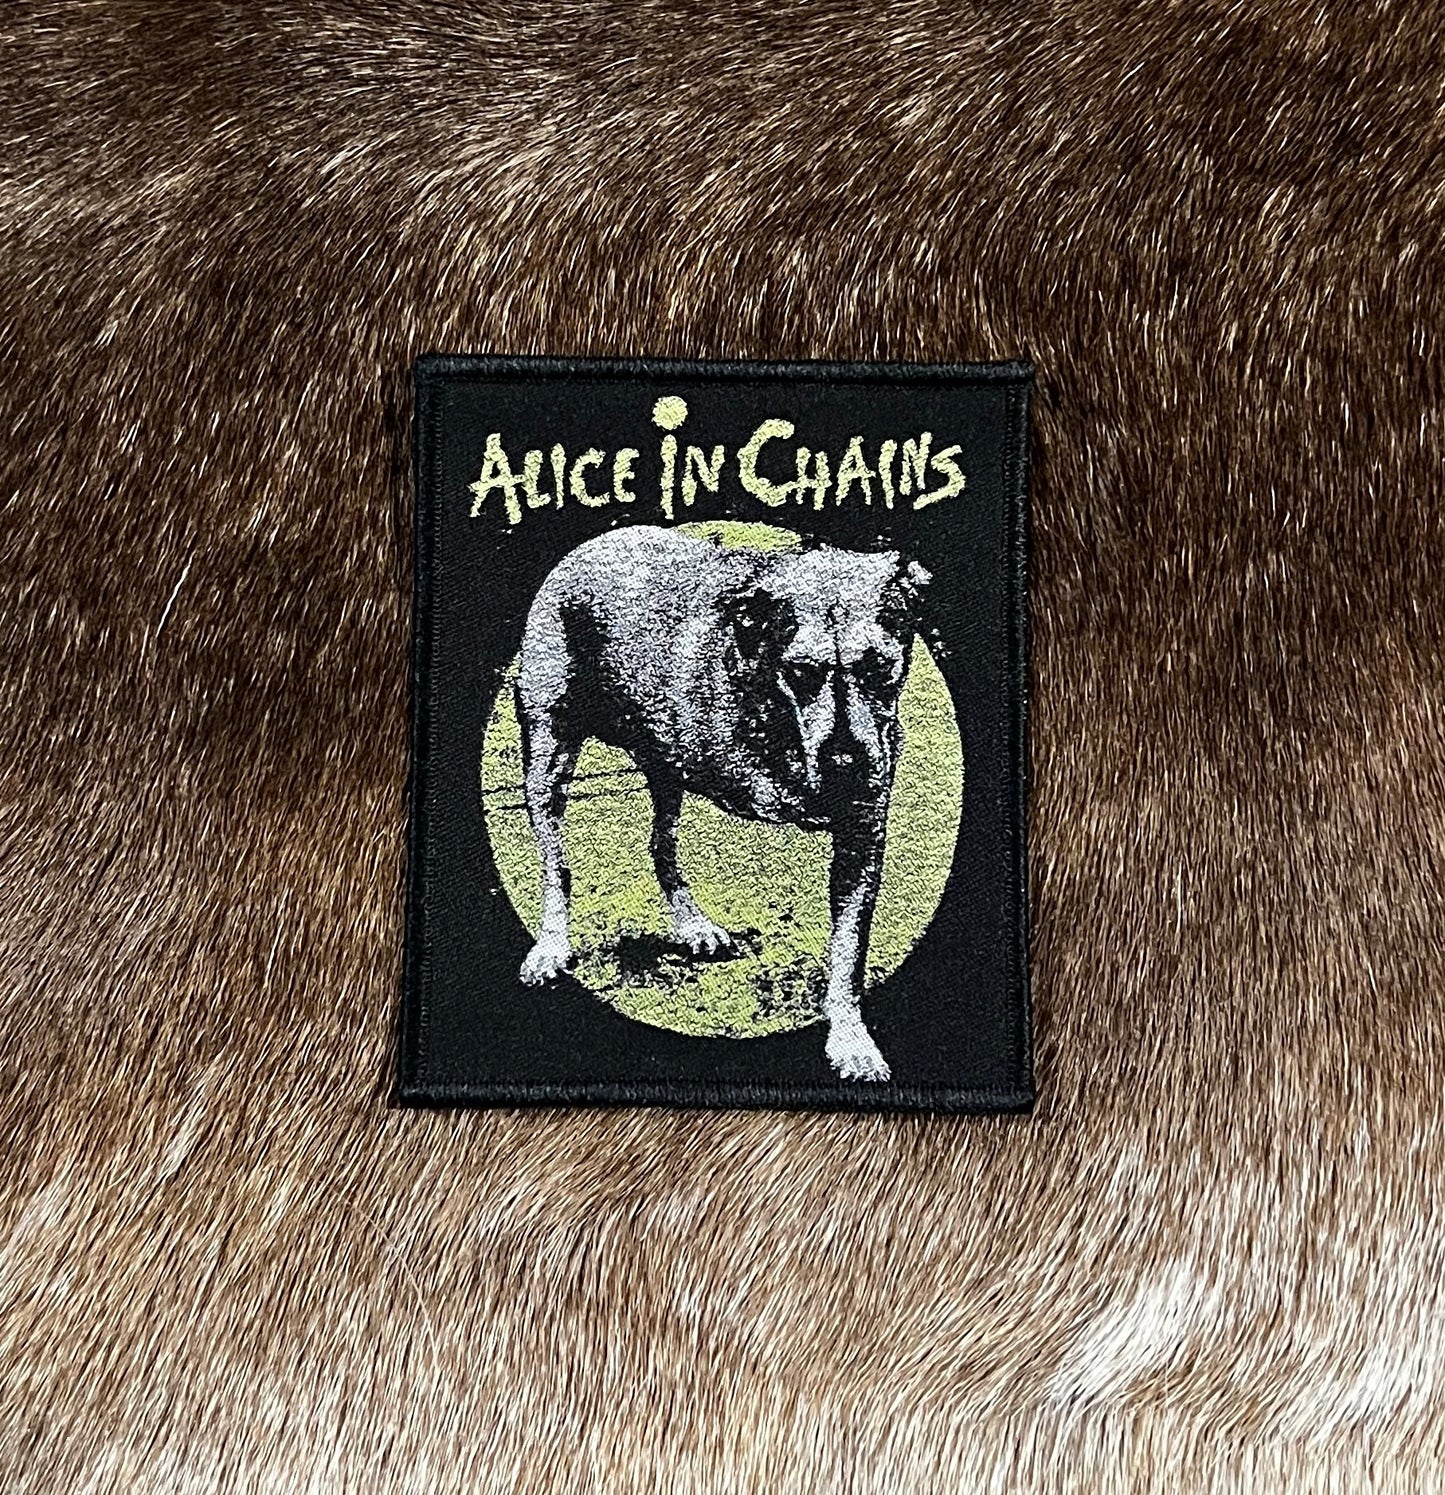 Alice In Chains - Alice In Chains Patch